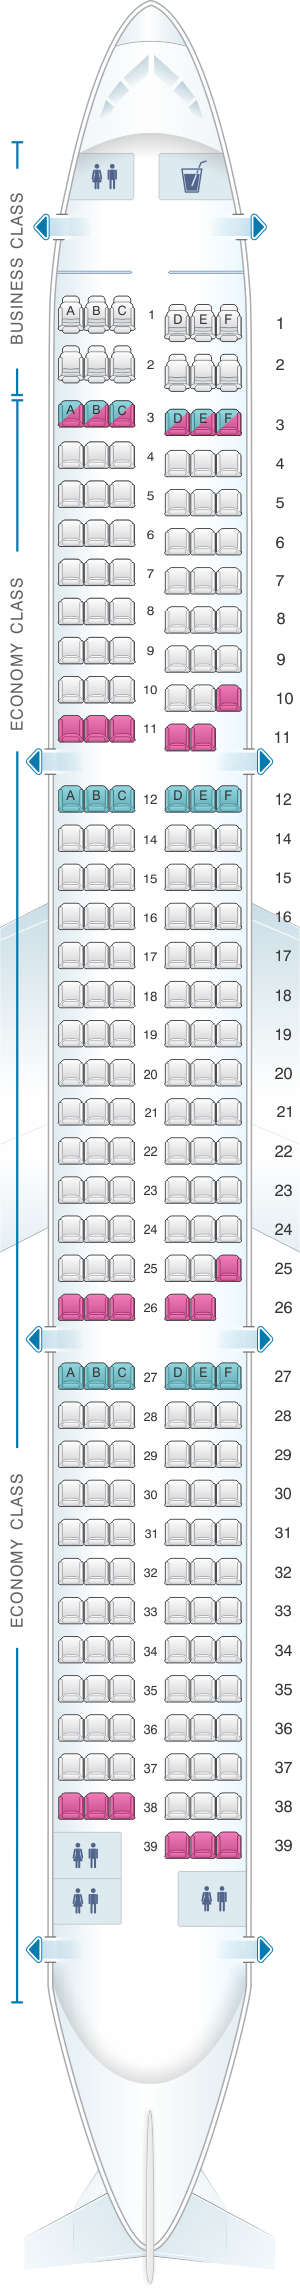 Seat map for Air Moldova Airbus A321